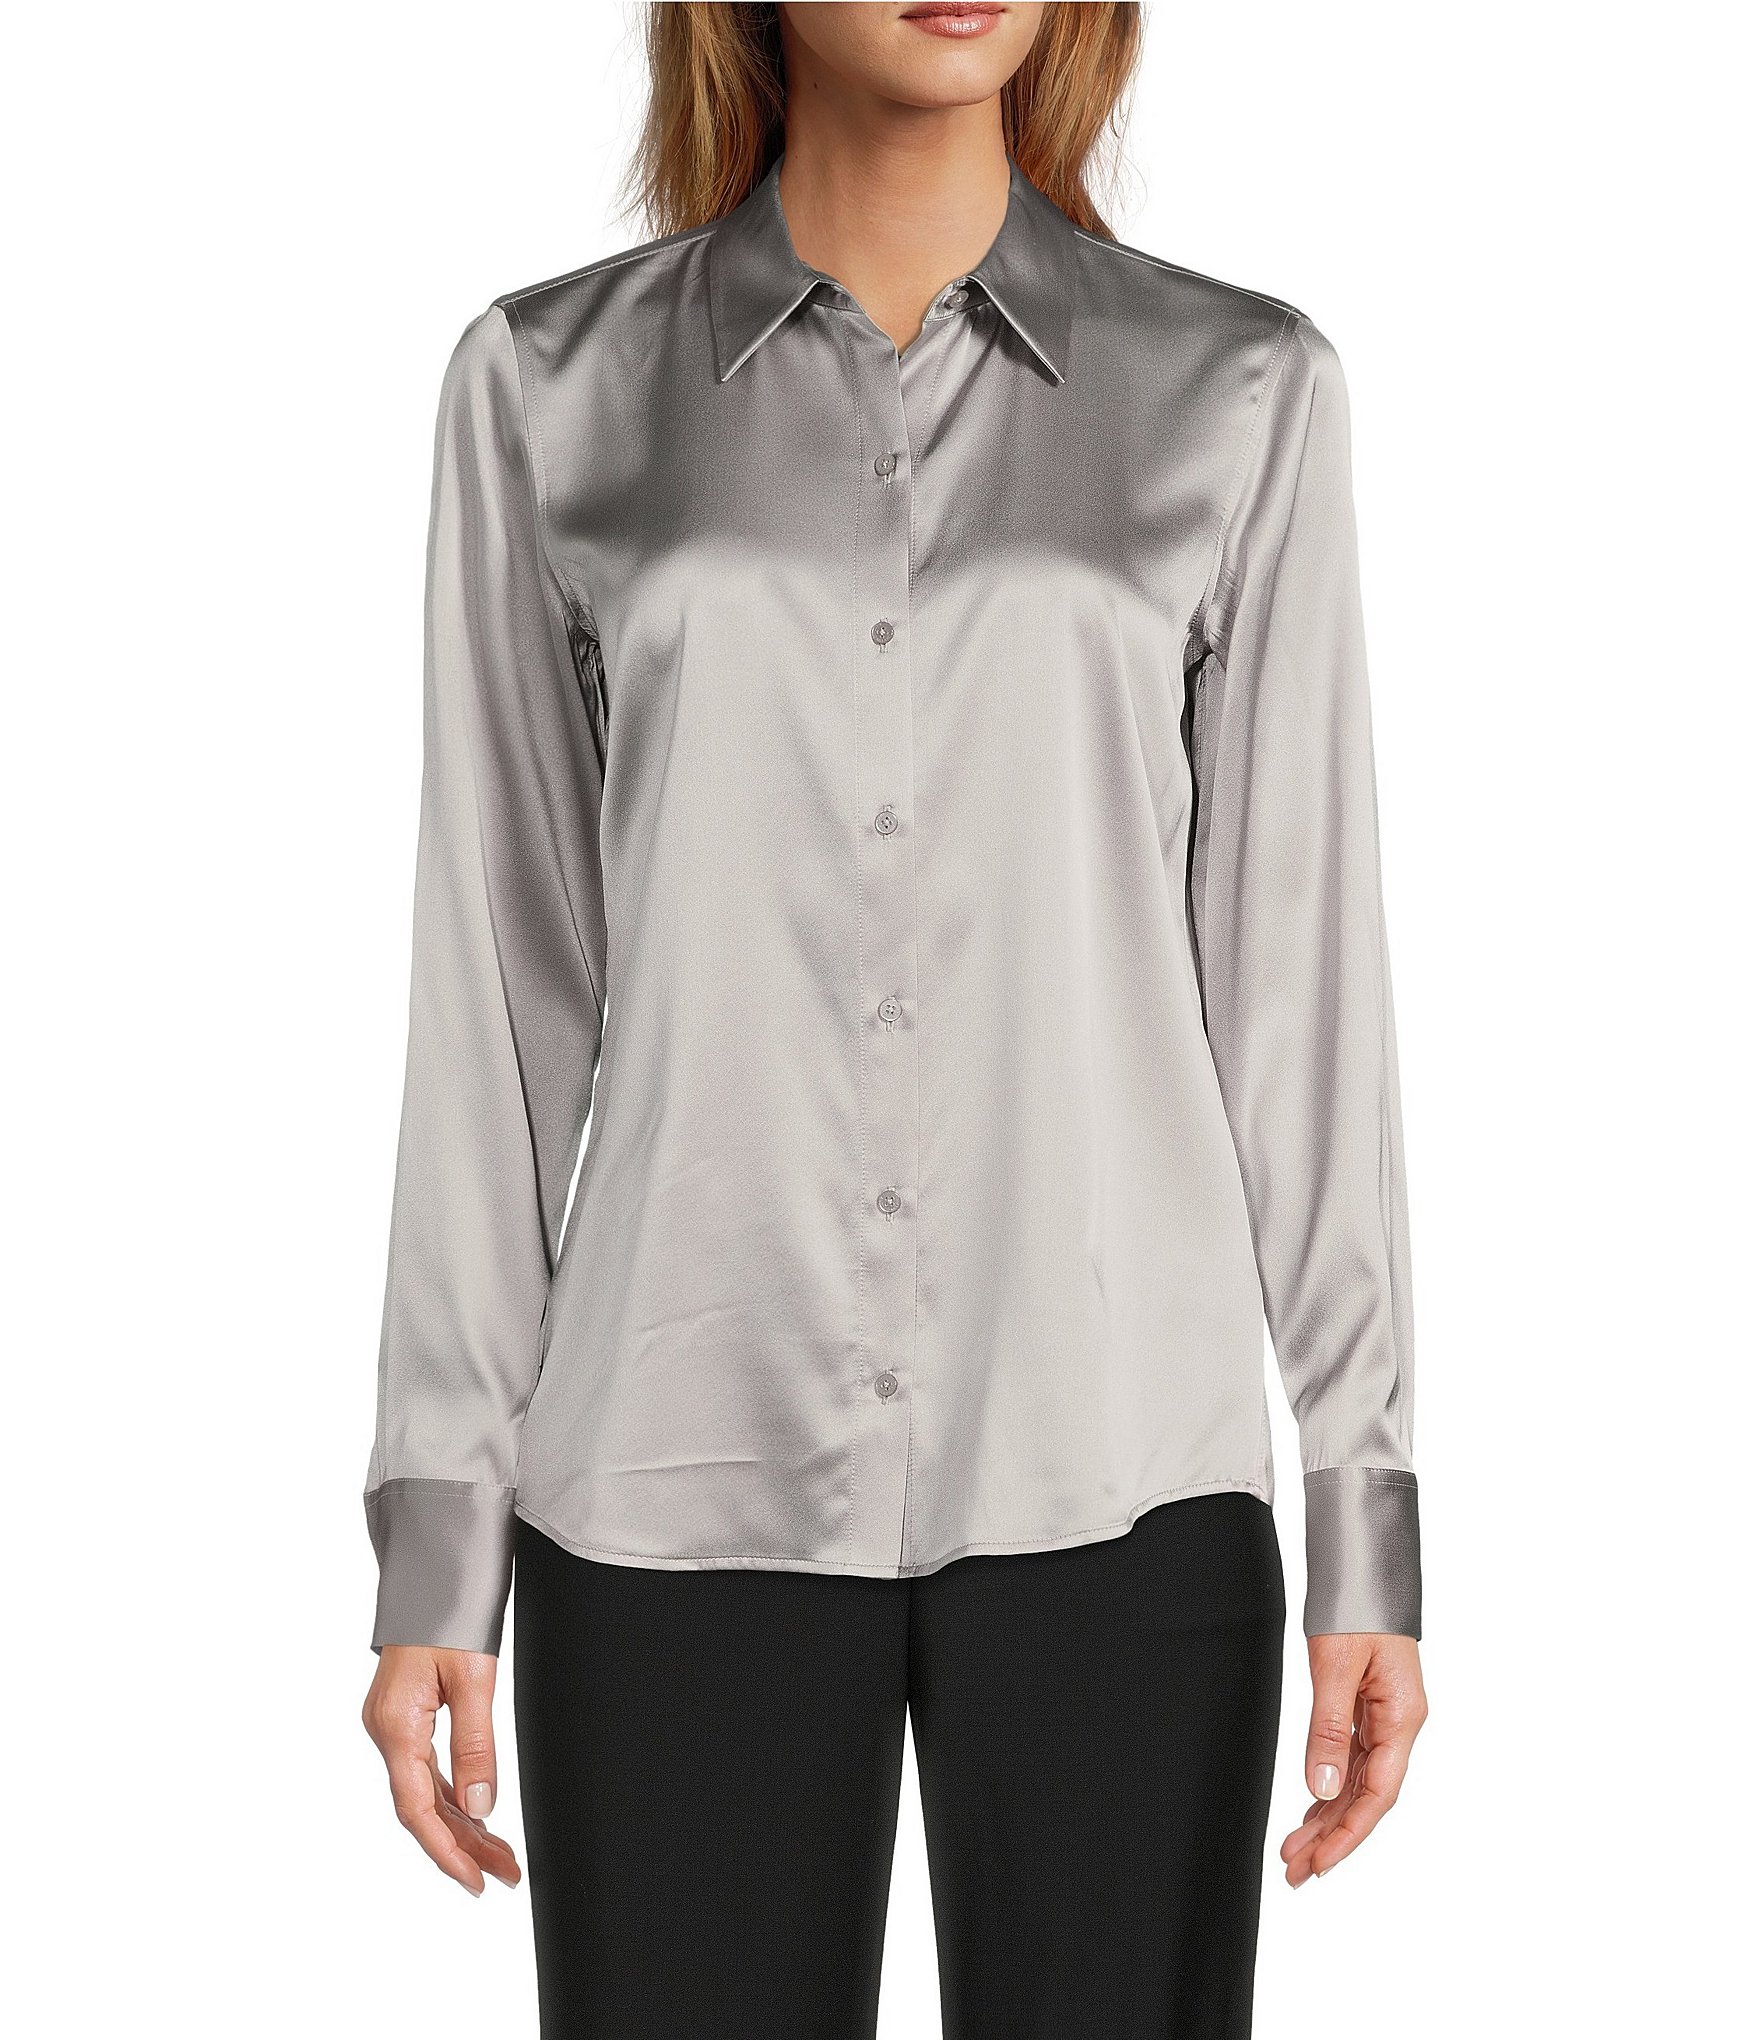 Buy Silver Blouse Collection For Women Online At Best Prices